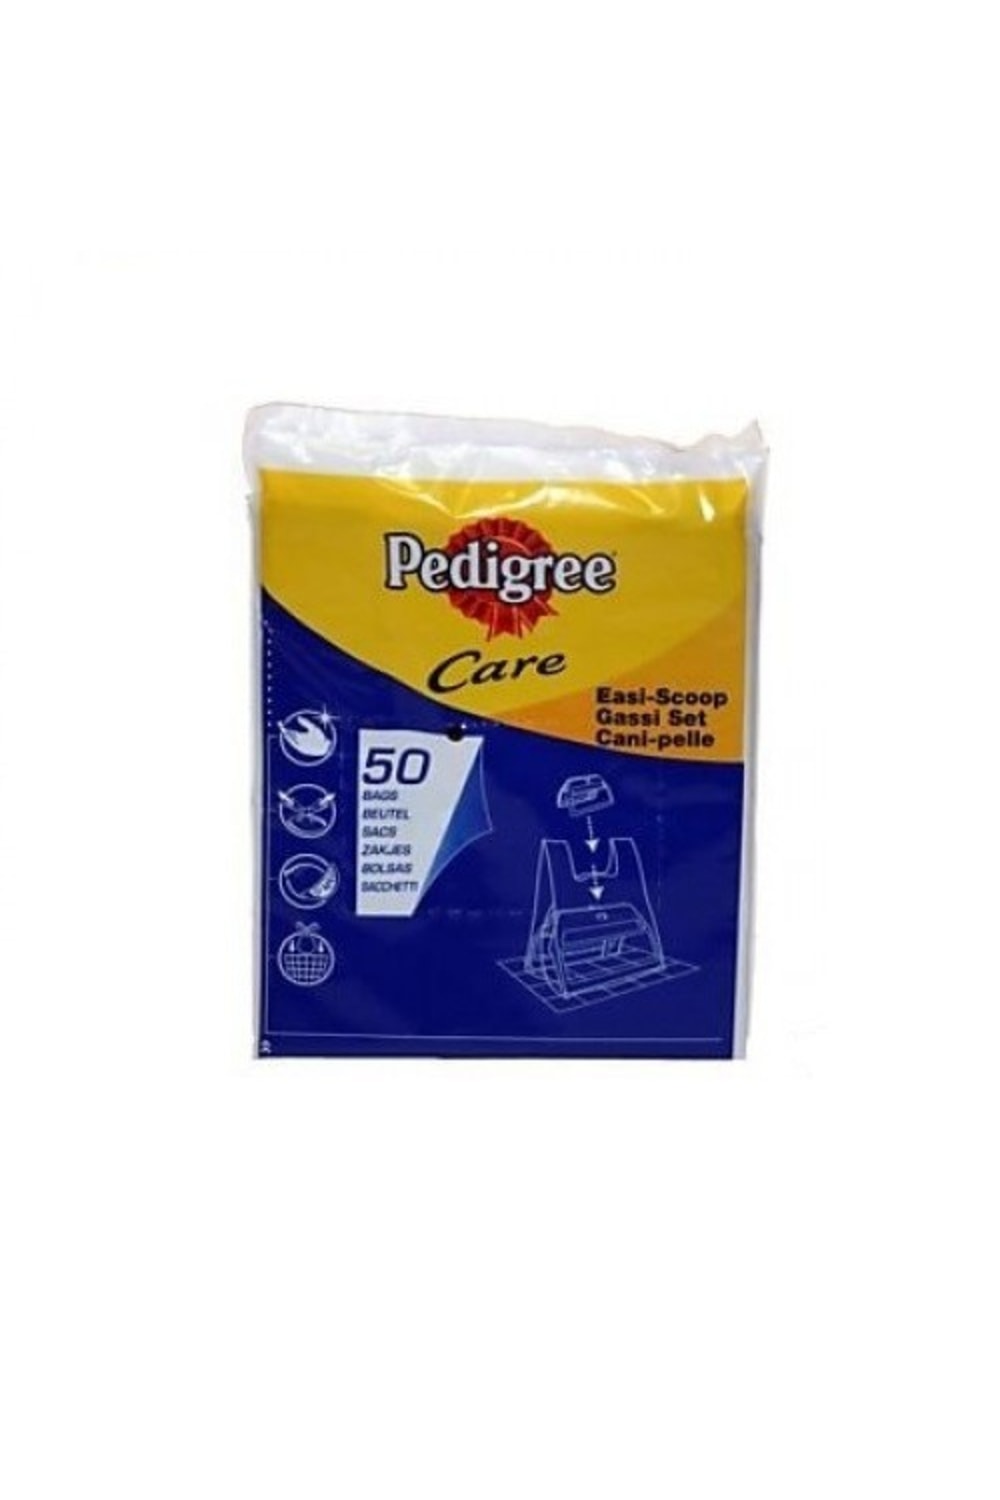 Pedigree Exelpet Easi-Scoop Refill Plastic Bags (14 X Pack Of 50) (May Vary) (One Size)